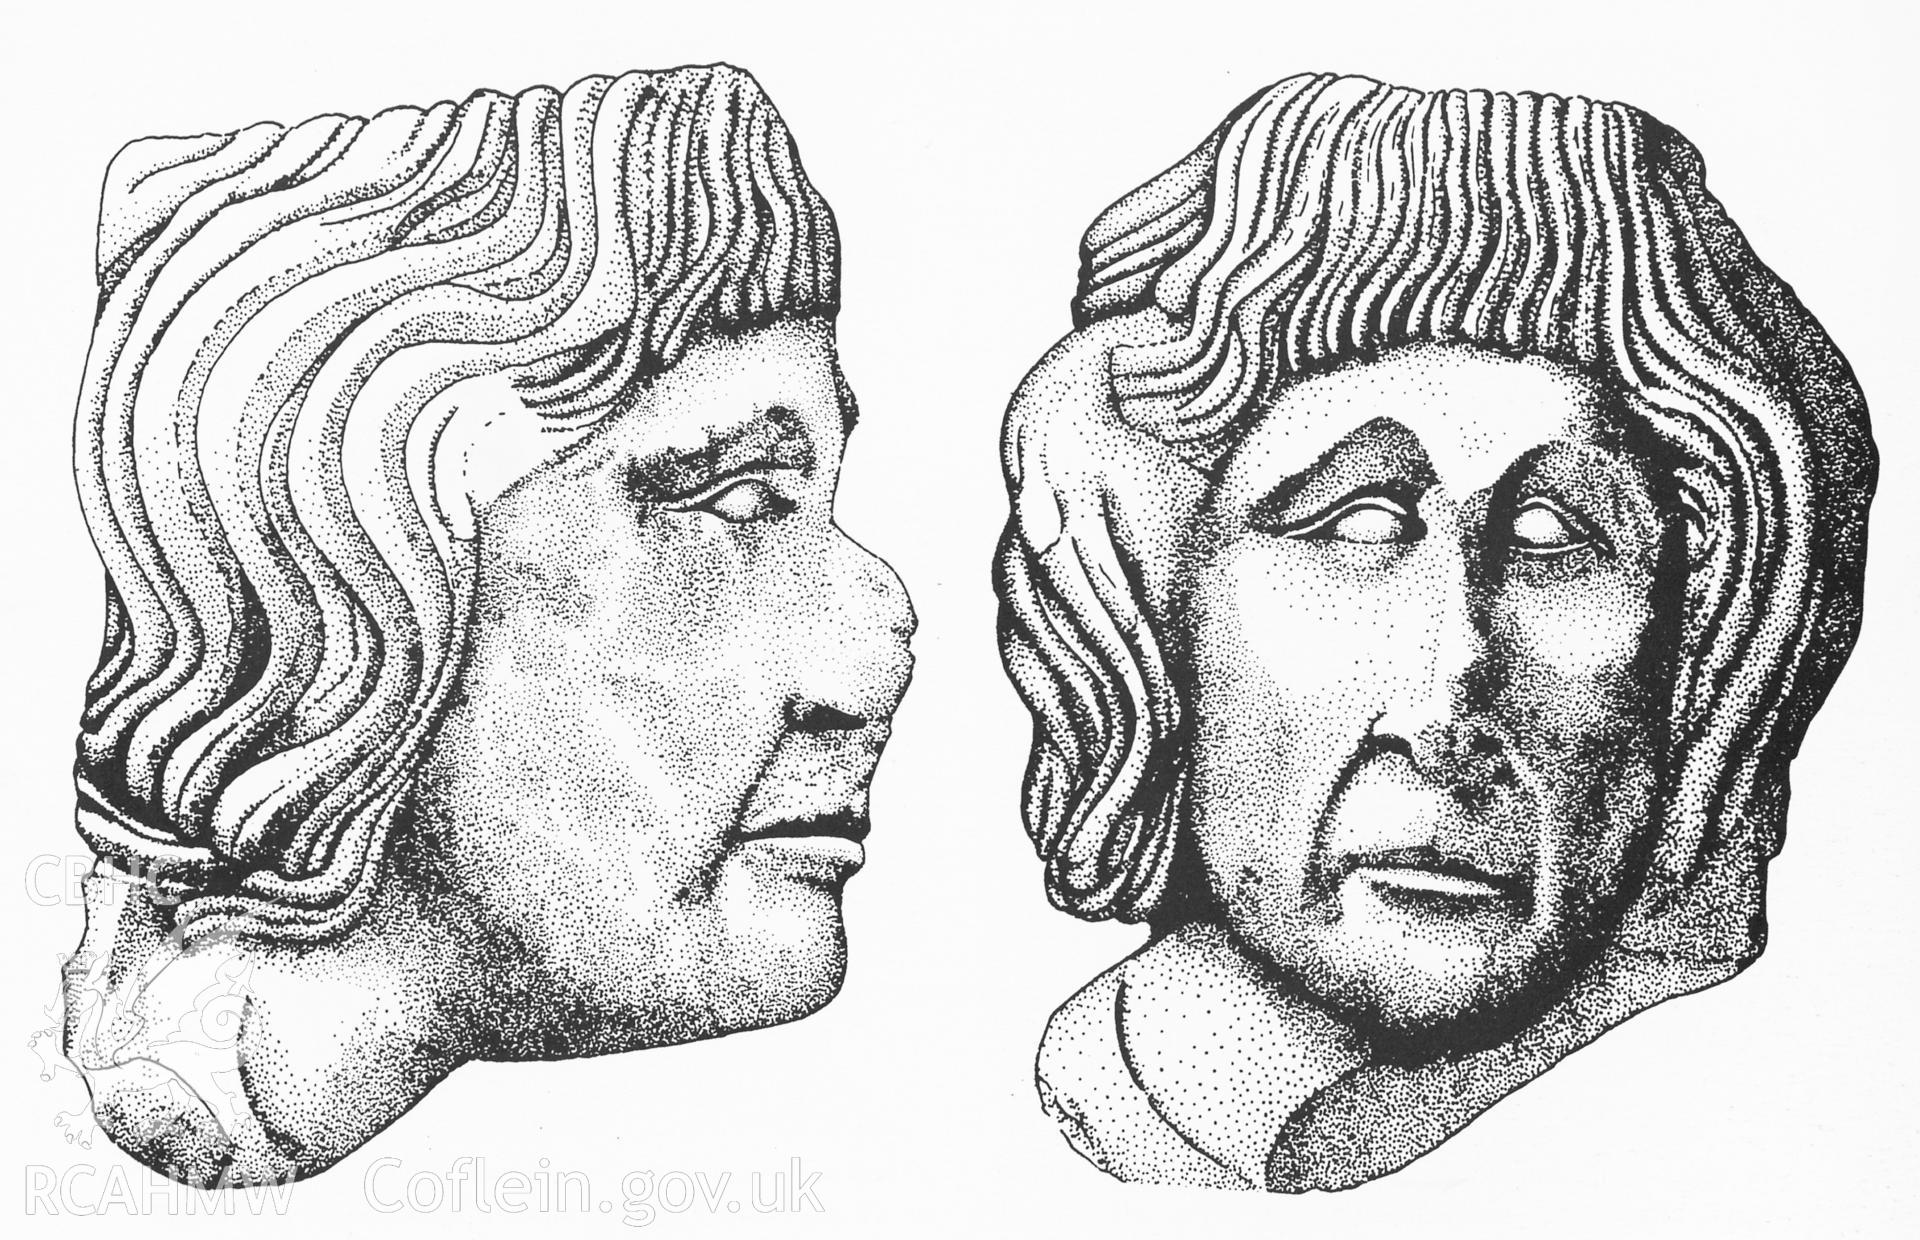 Digitised copy of a pen and ink drawing of carved head from Caerphilly Castle, from the RCAHMW Glamorgan Inventory Later Castles, Figure 46.